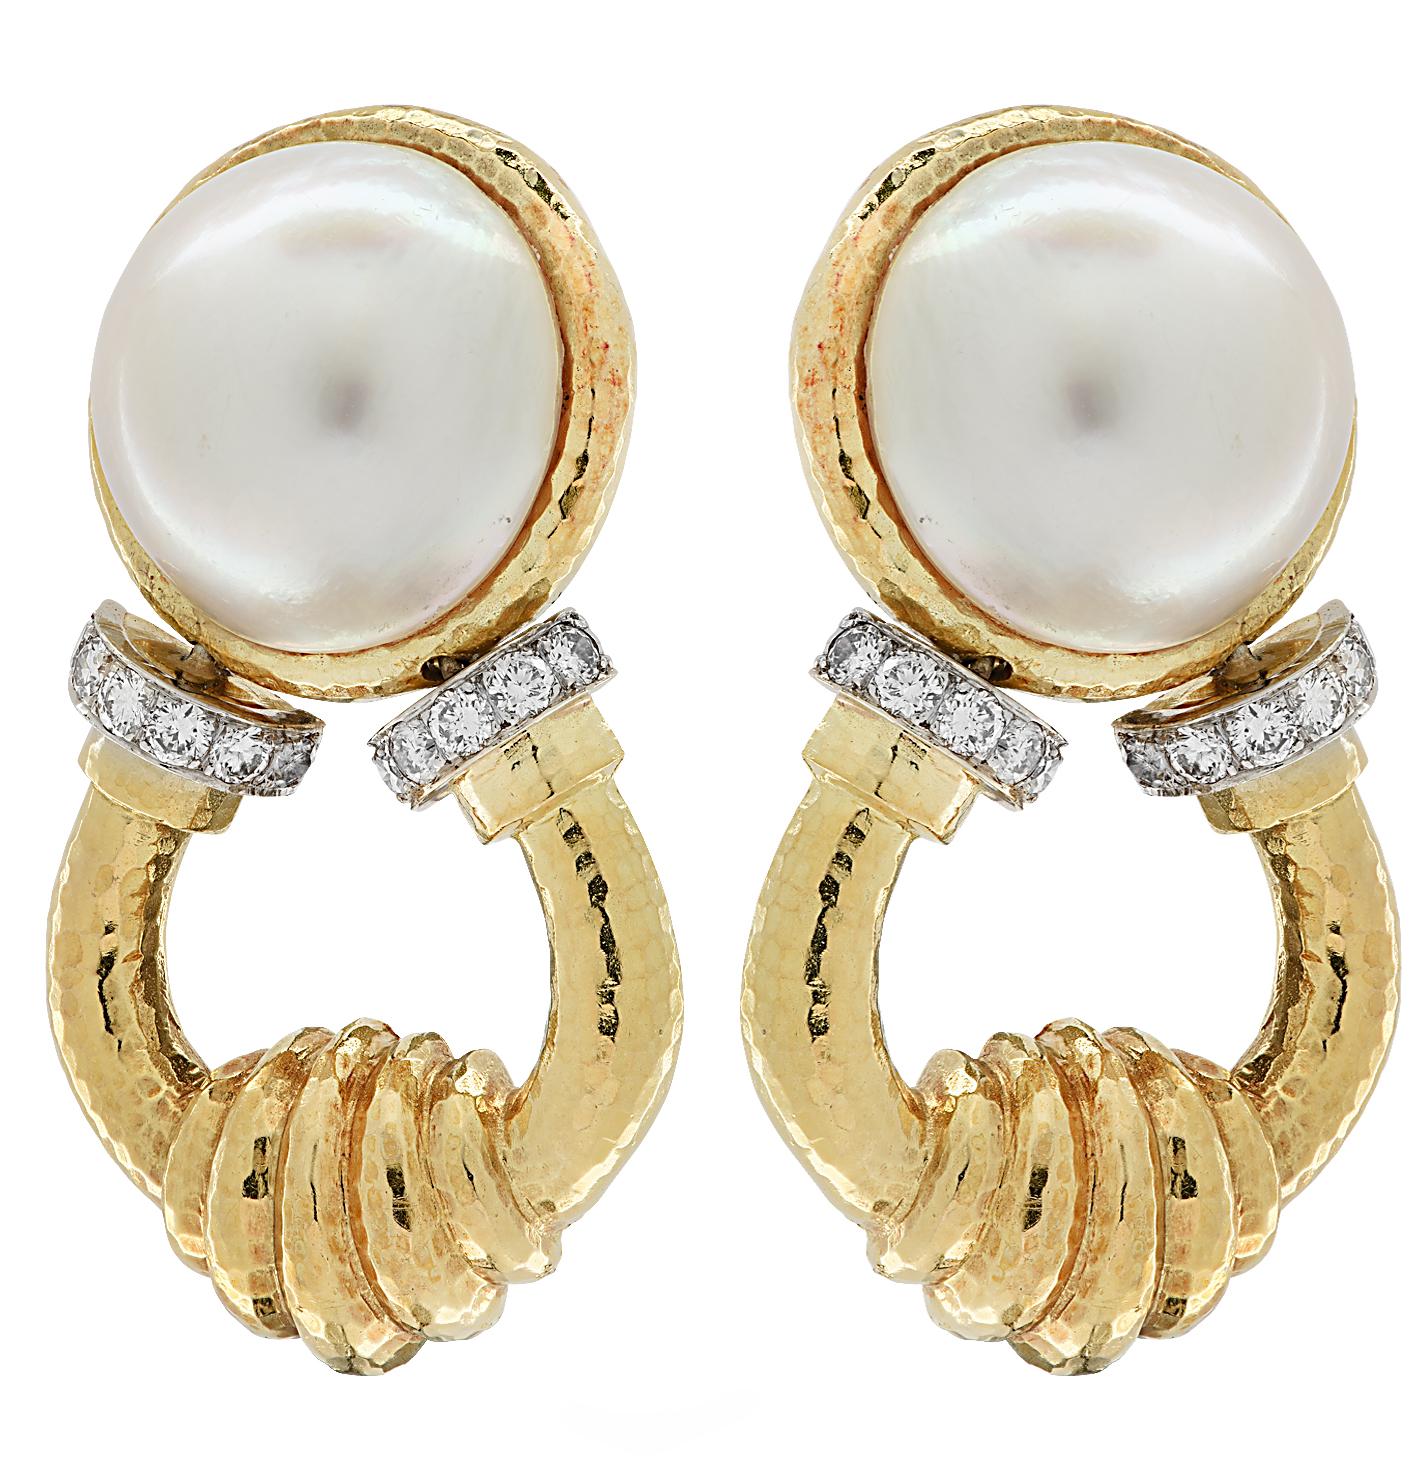 Striking door knocker clip on earrings crafted in 18 karat yellow and white gold, showcasing two mabe’ pearls measuring 20 mm in diameter, accented by 24 round brilliant cut diamonds weighing approximately 1.2 carats total, H-I color, VS-SI clarity,